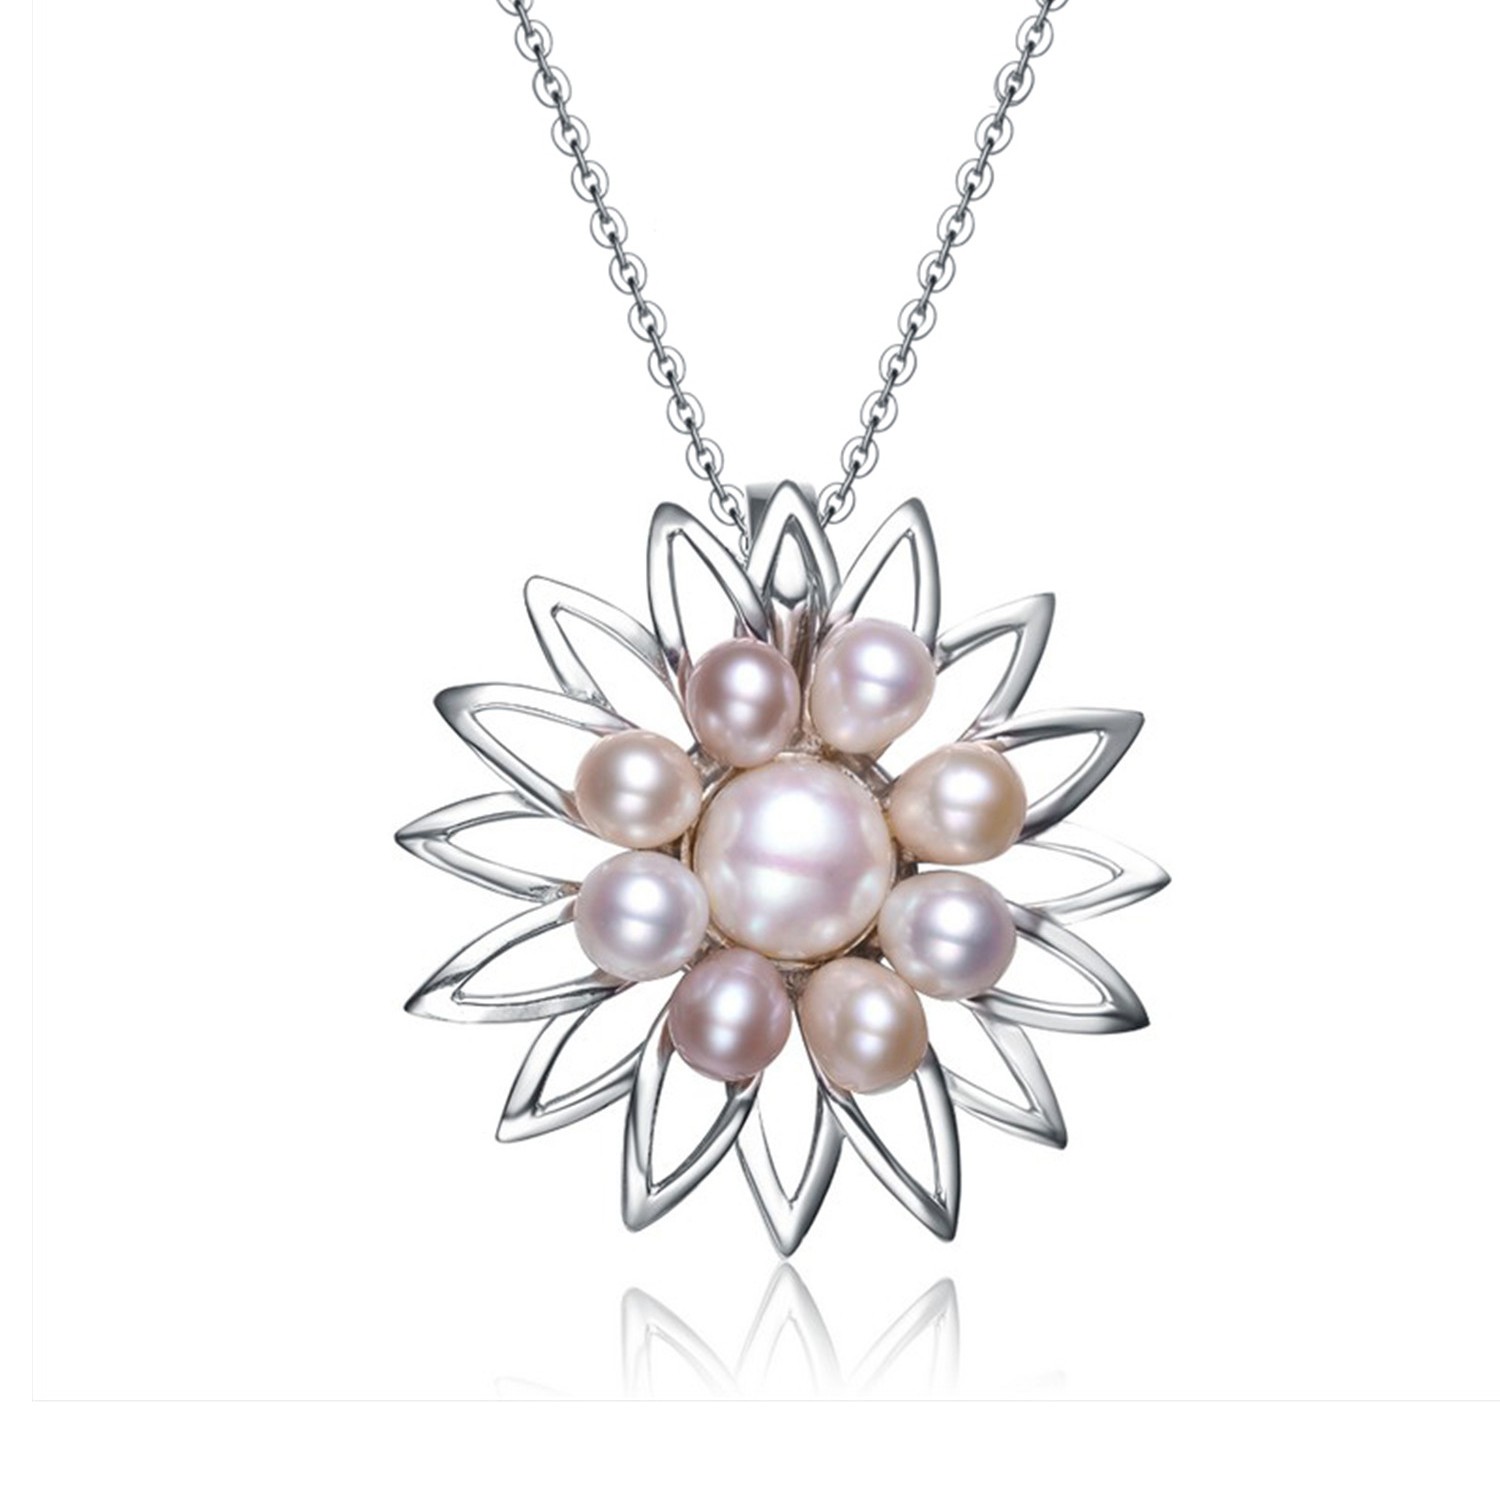 High quality elegant necklace 925 sterling silver necklace flower pearl necklace pendant